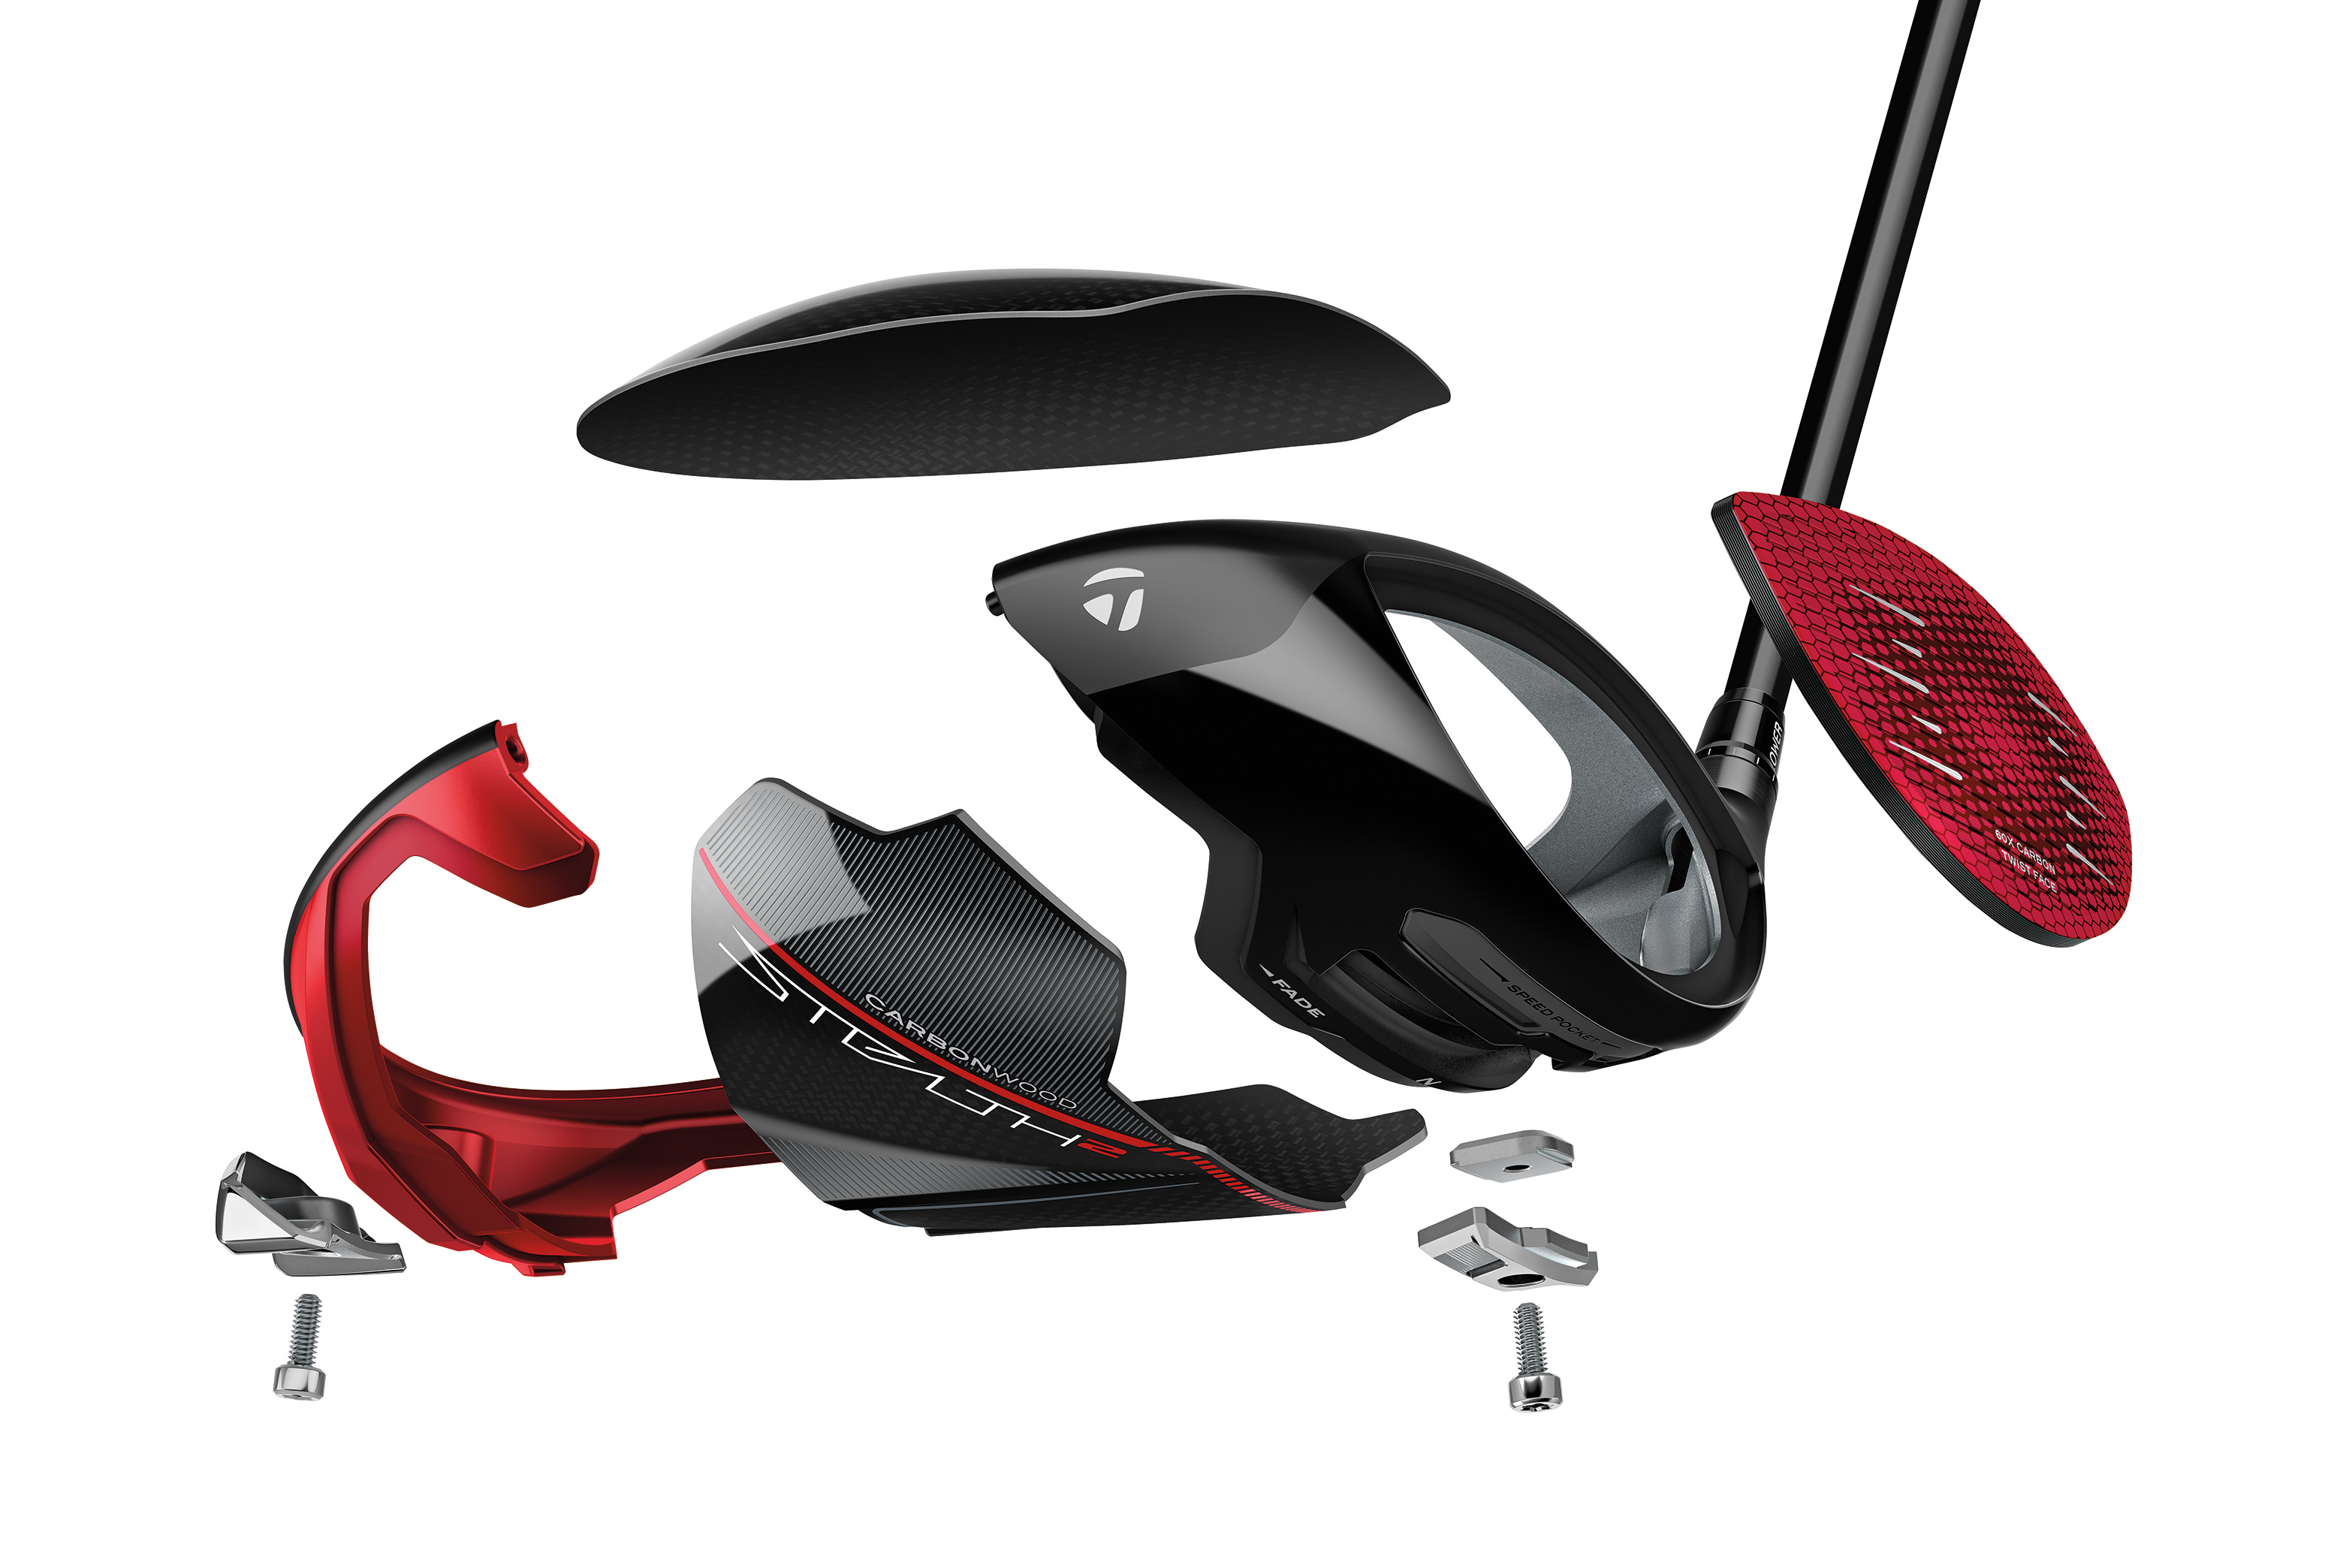 TaylorMade Stealth 2 drivers: What you need to know | Golf